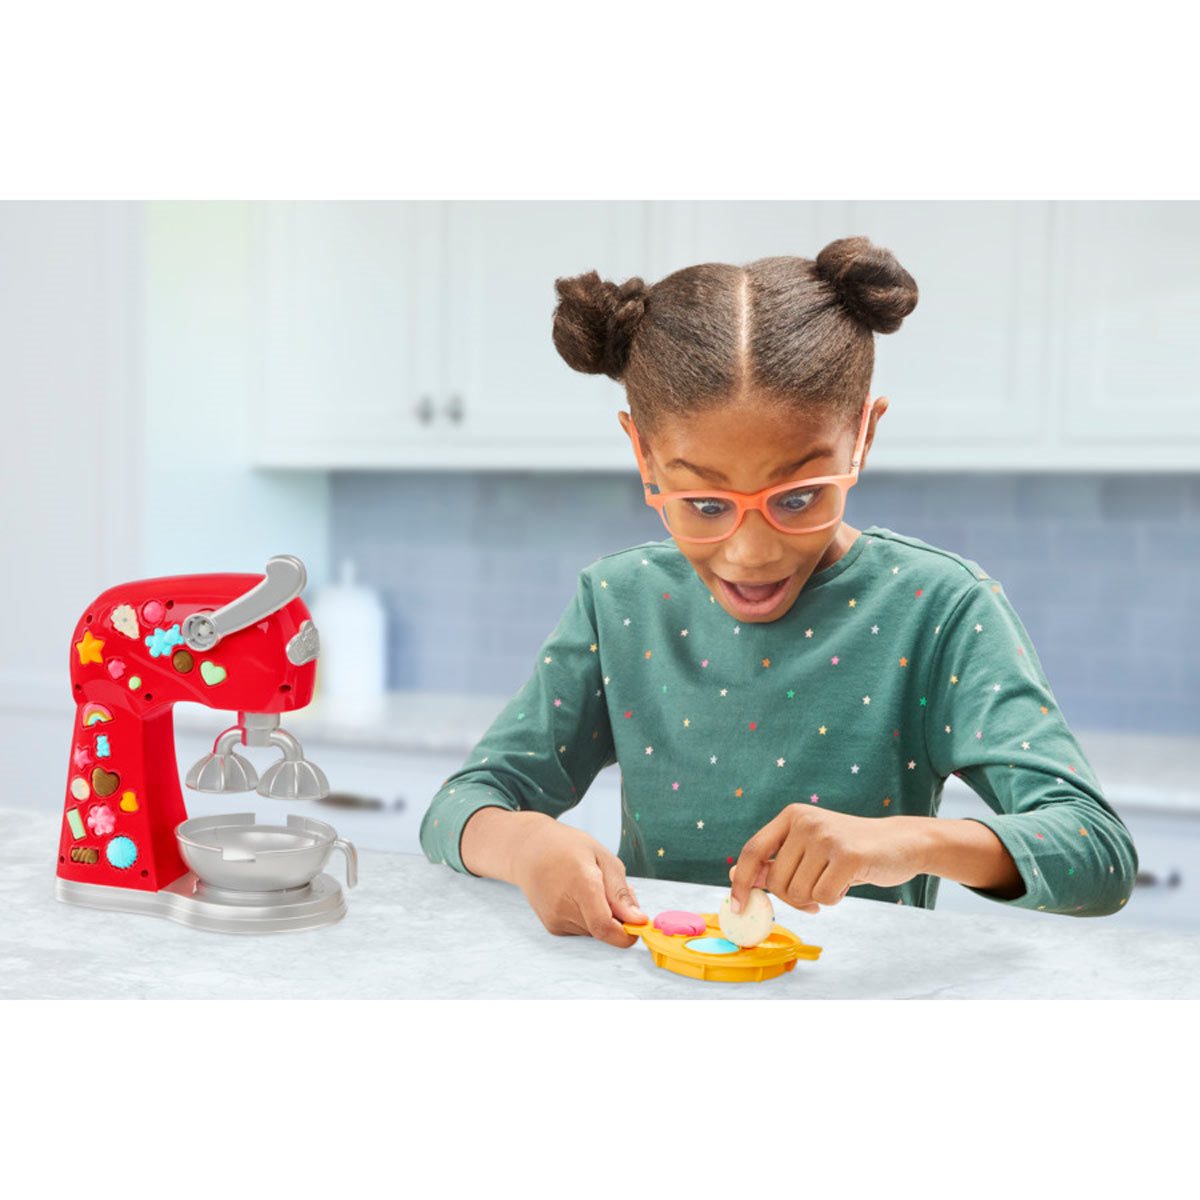  Play-Doh Kitchen Creations Magical Oven Play Food